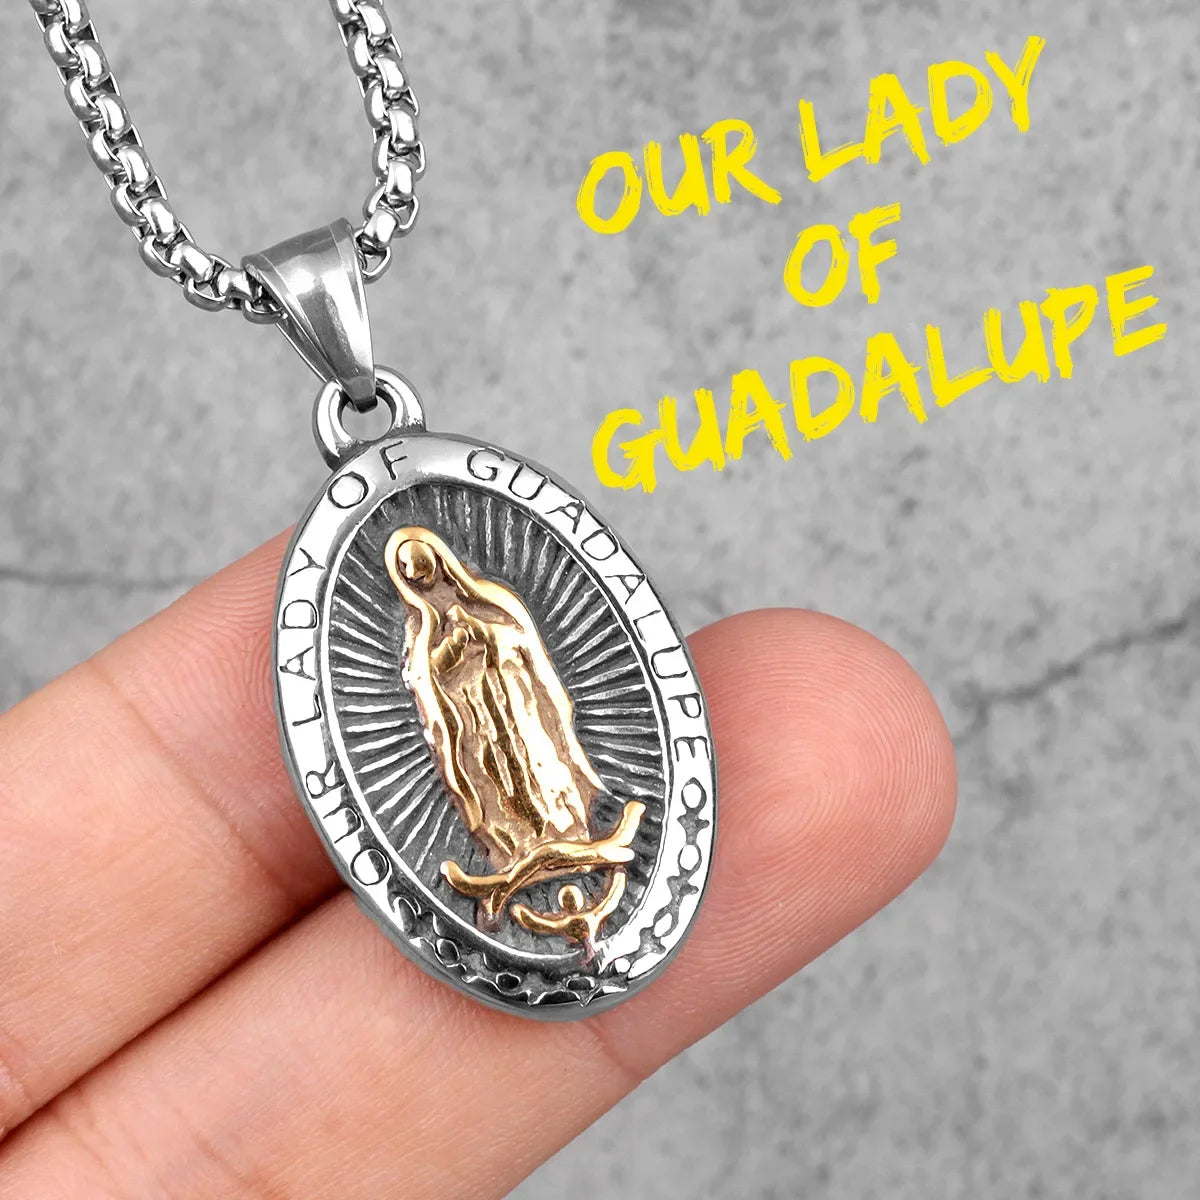 Virgin Mary Guadalupe Angel Cross Stainless Steel Men Necklaces Pendant Chain Amulet For Women Fashion Jewelry Gifts Virgin Mary-T